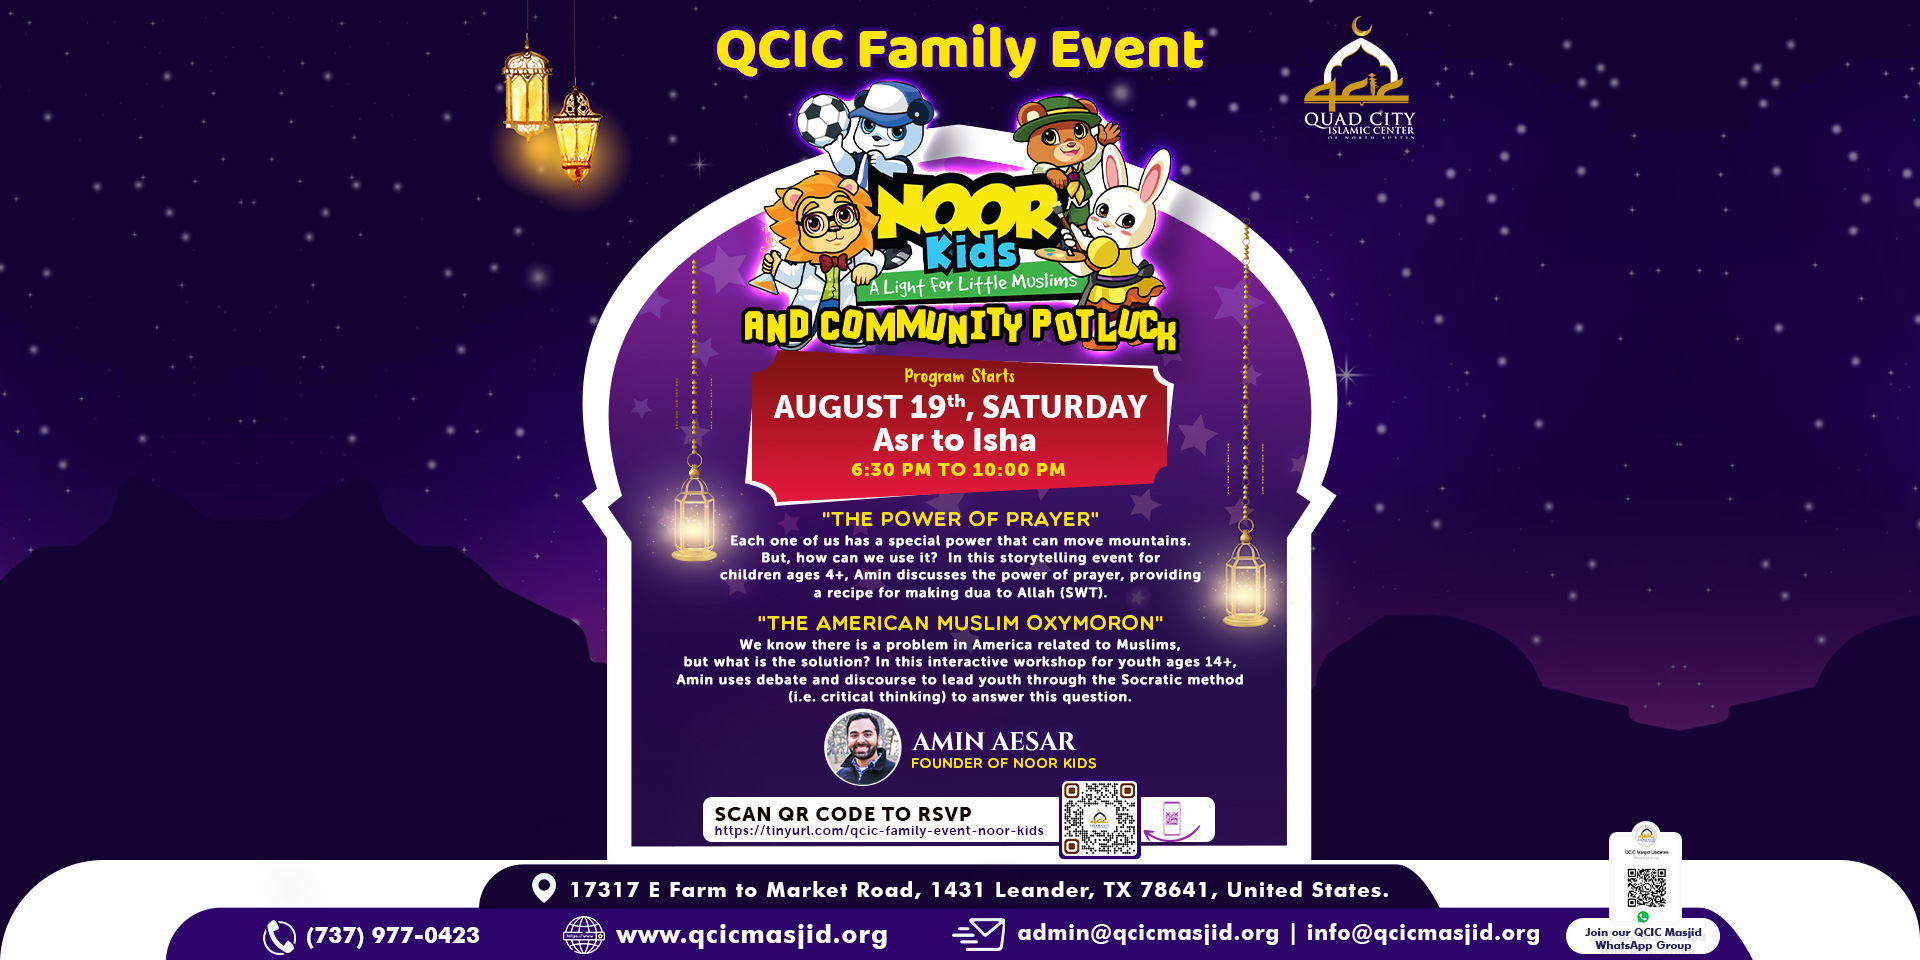 QCIC Family Event – Noor Kids and Community Potluck